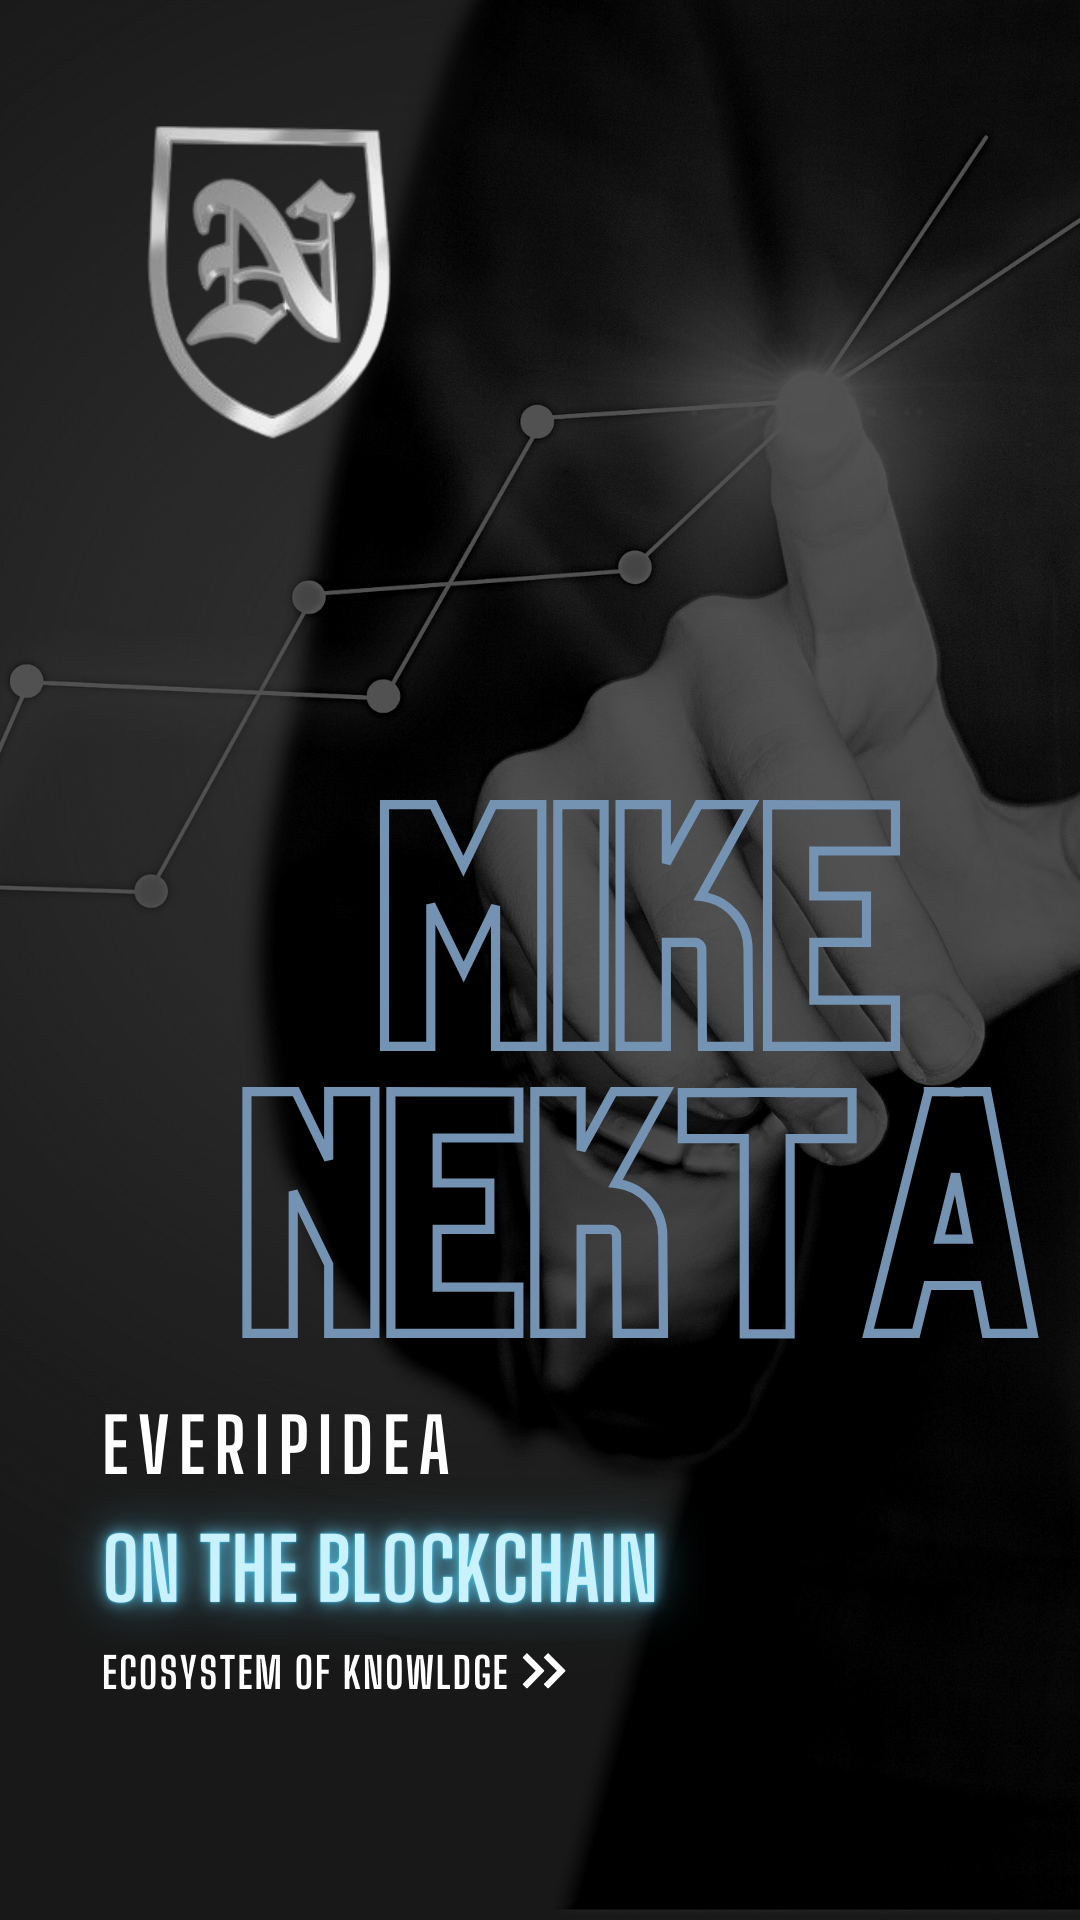 Mike Nekta's diamond expertise has had him cited in major media outlets such as the Daily Mail , Page Six of the New York Post , and Celebrity Buzz.